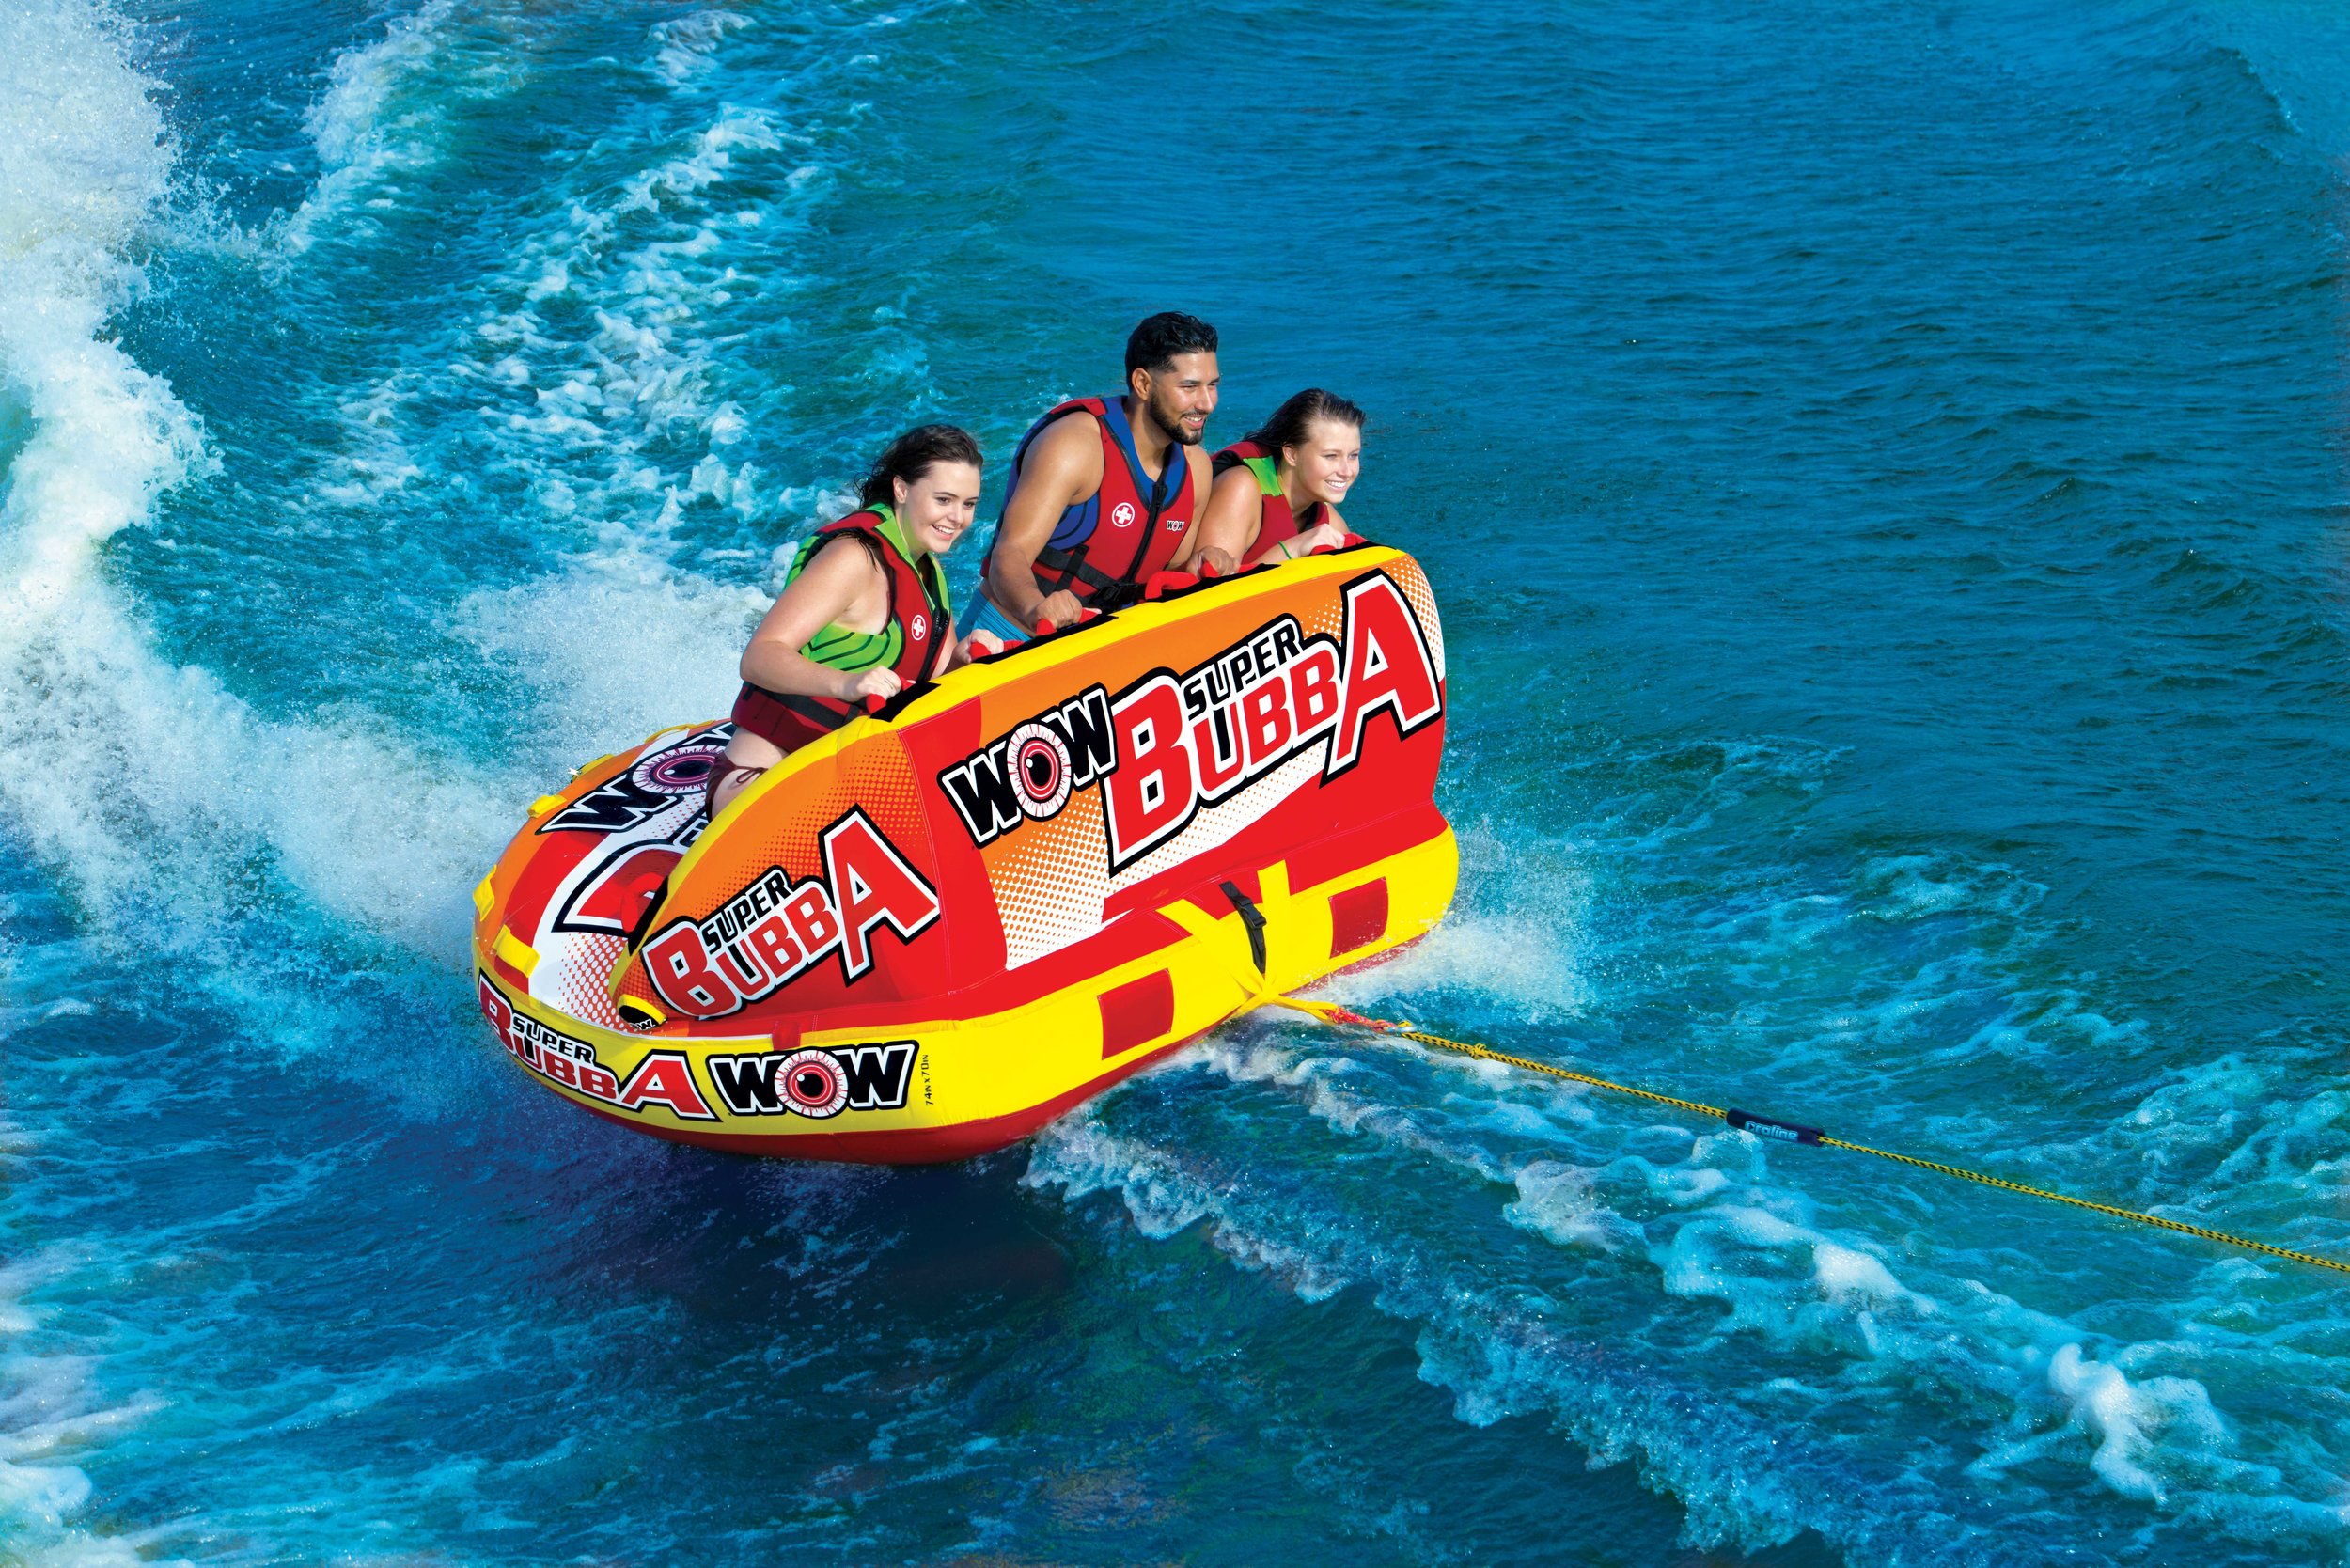 Wow World of Watersports Super Bubba Hi VIS 人 低価格